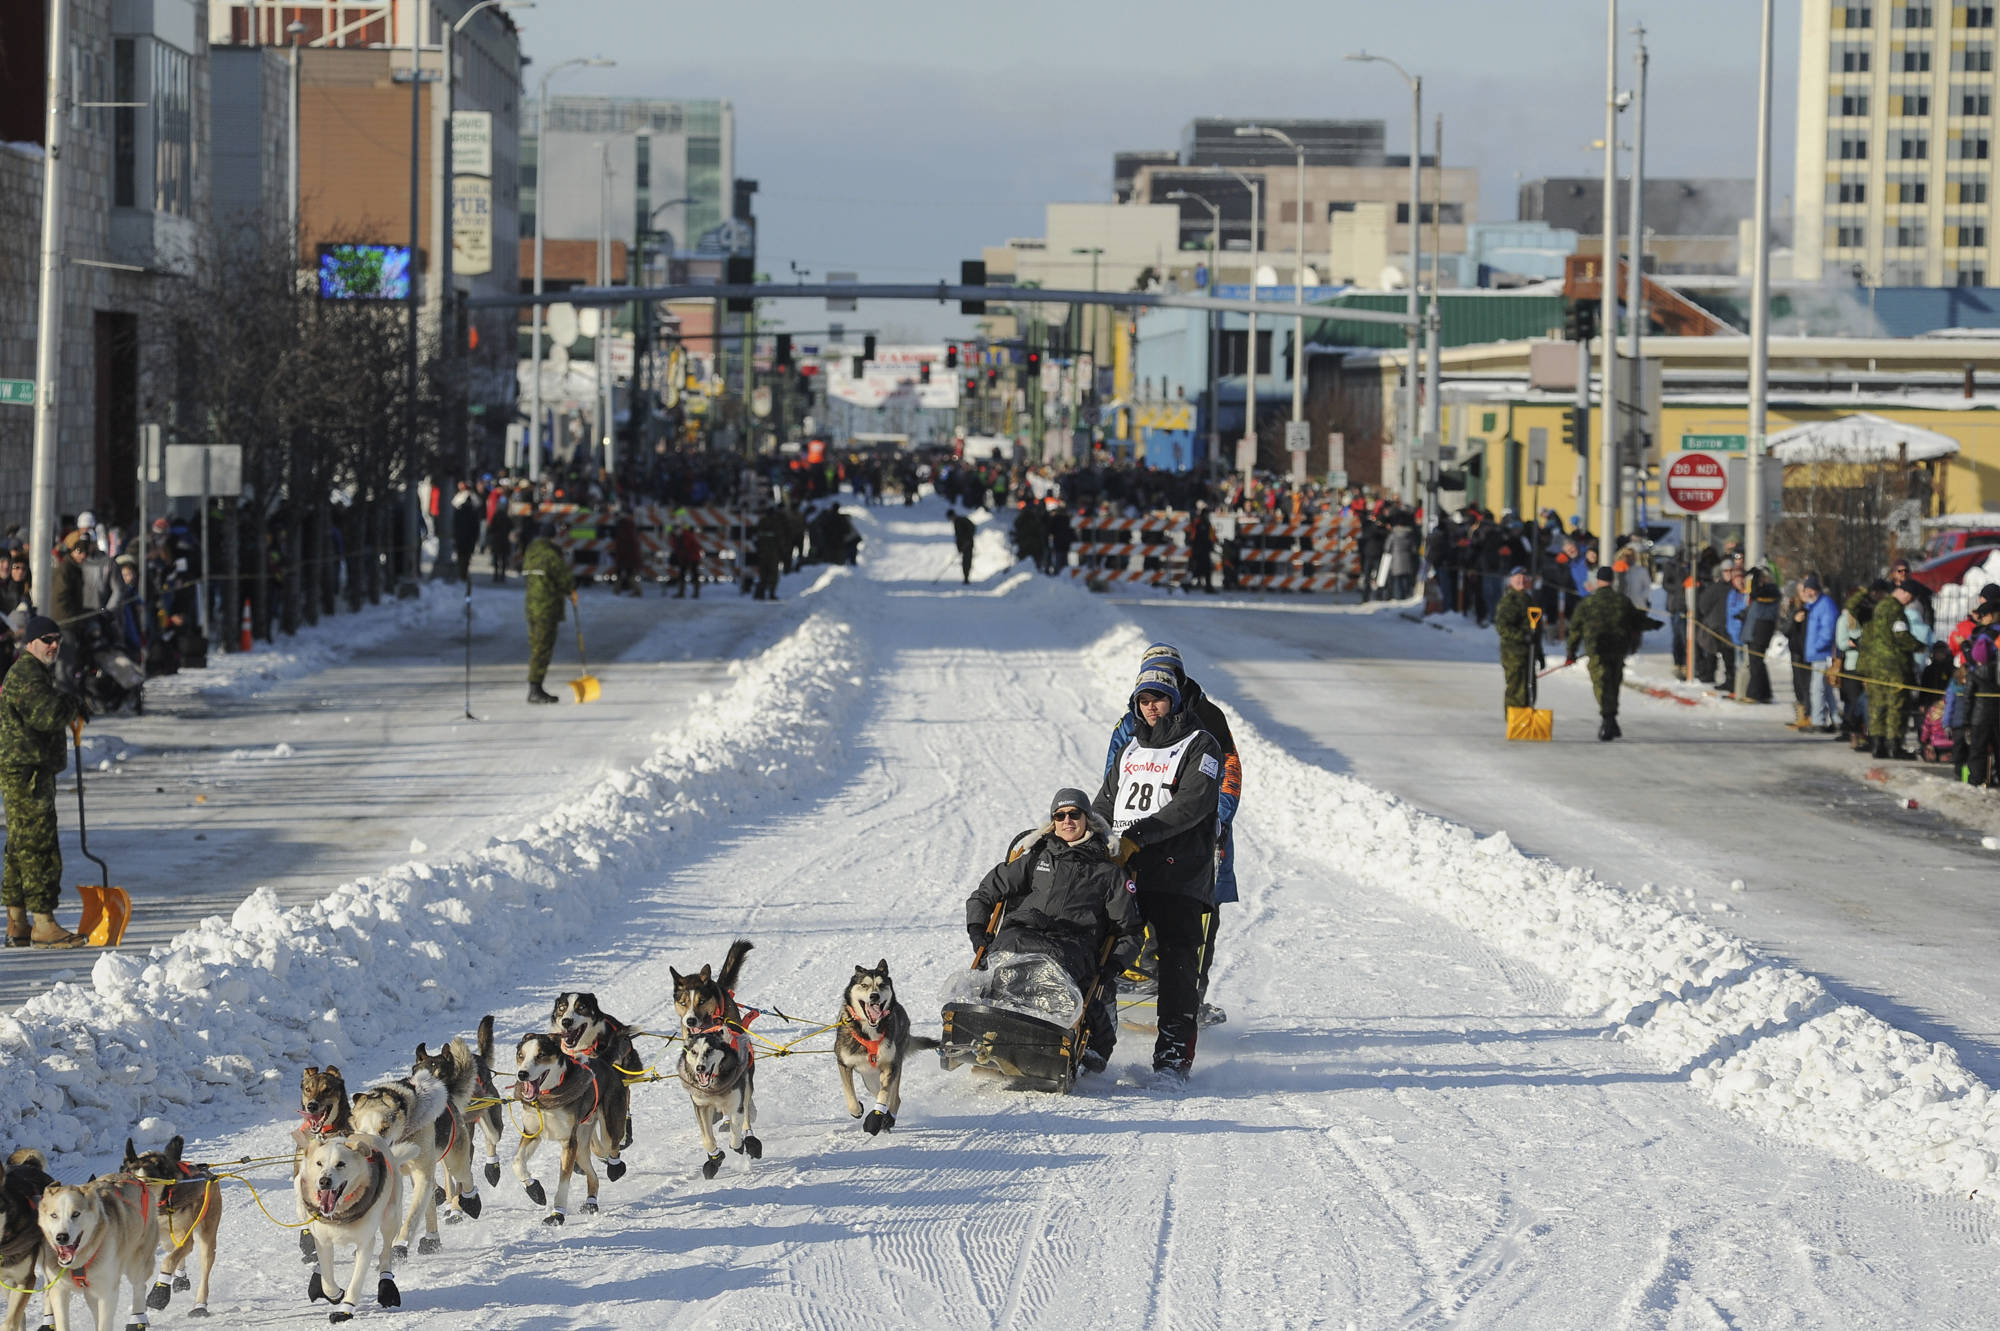 Defending champion Joar Lefseth Ulsom runs his team down Fourth Ave during the ceremonial start of the Iditarod Trail Sled Dog Race in Anchorage. Alaska Airlines announced Monday, March 2, 2020, it will drop its sponsorship of the Iditarod, Alaska’s most famous sporting event. The airline in a statement said the decision was made as it transitions to a new corporate giving strategy, but People for the Ethical Treatment of Animals, the most vocal critic of the thousand-mile sled dog race across Alaska, immediately took credit. (AP Photo/Michael Dinneen, File)